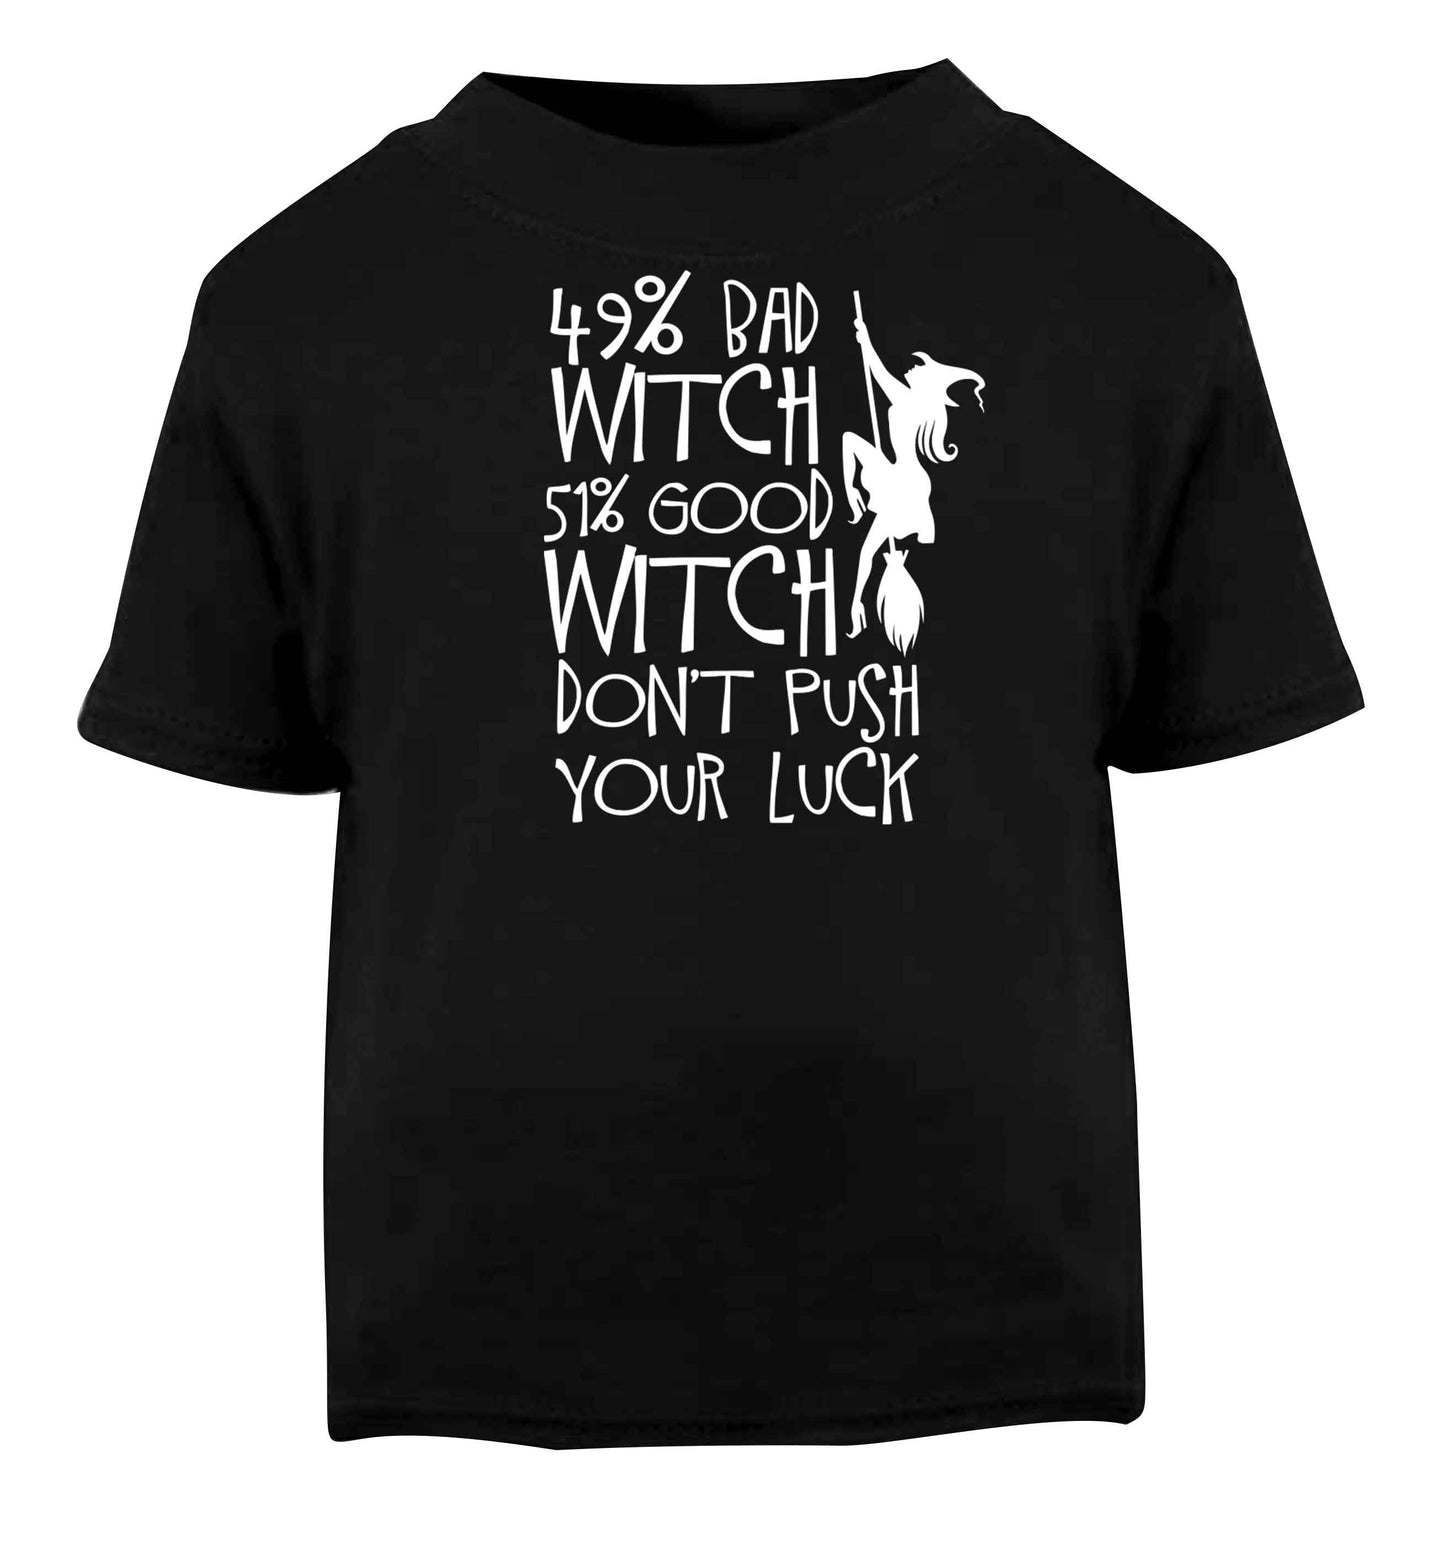 49% bad witch 51% good witch don't push your luck Black baby toddler Tshirt 2 years